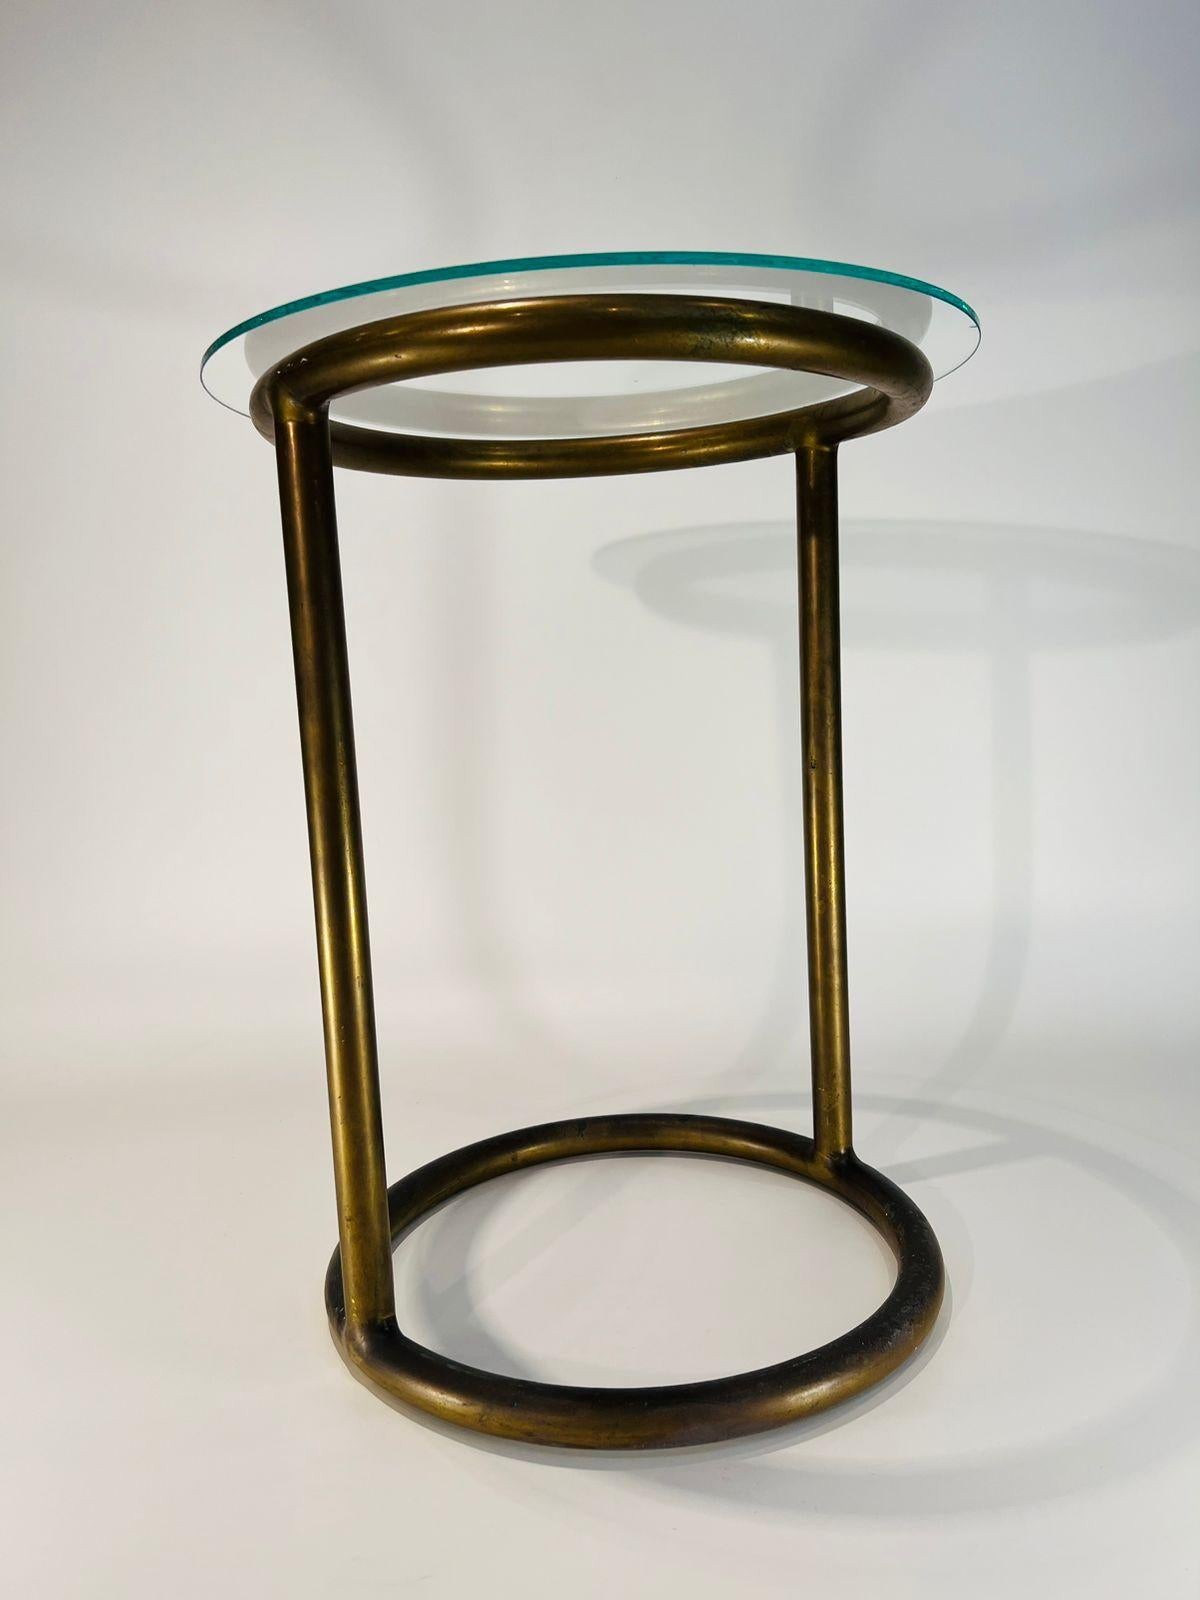 American Eileen Gray side table in metal and glass circa 1930 Art Deco For Sale